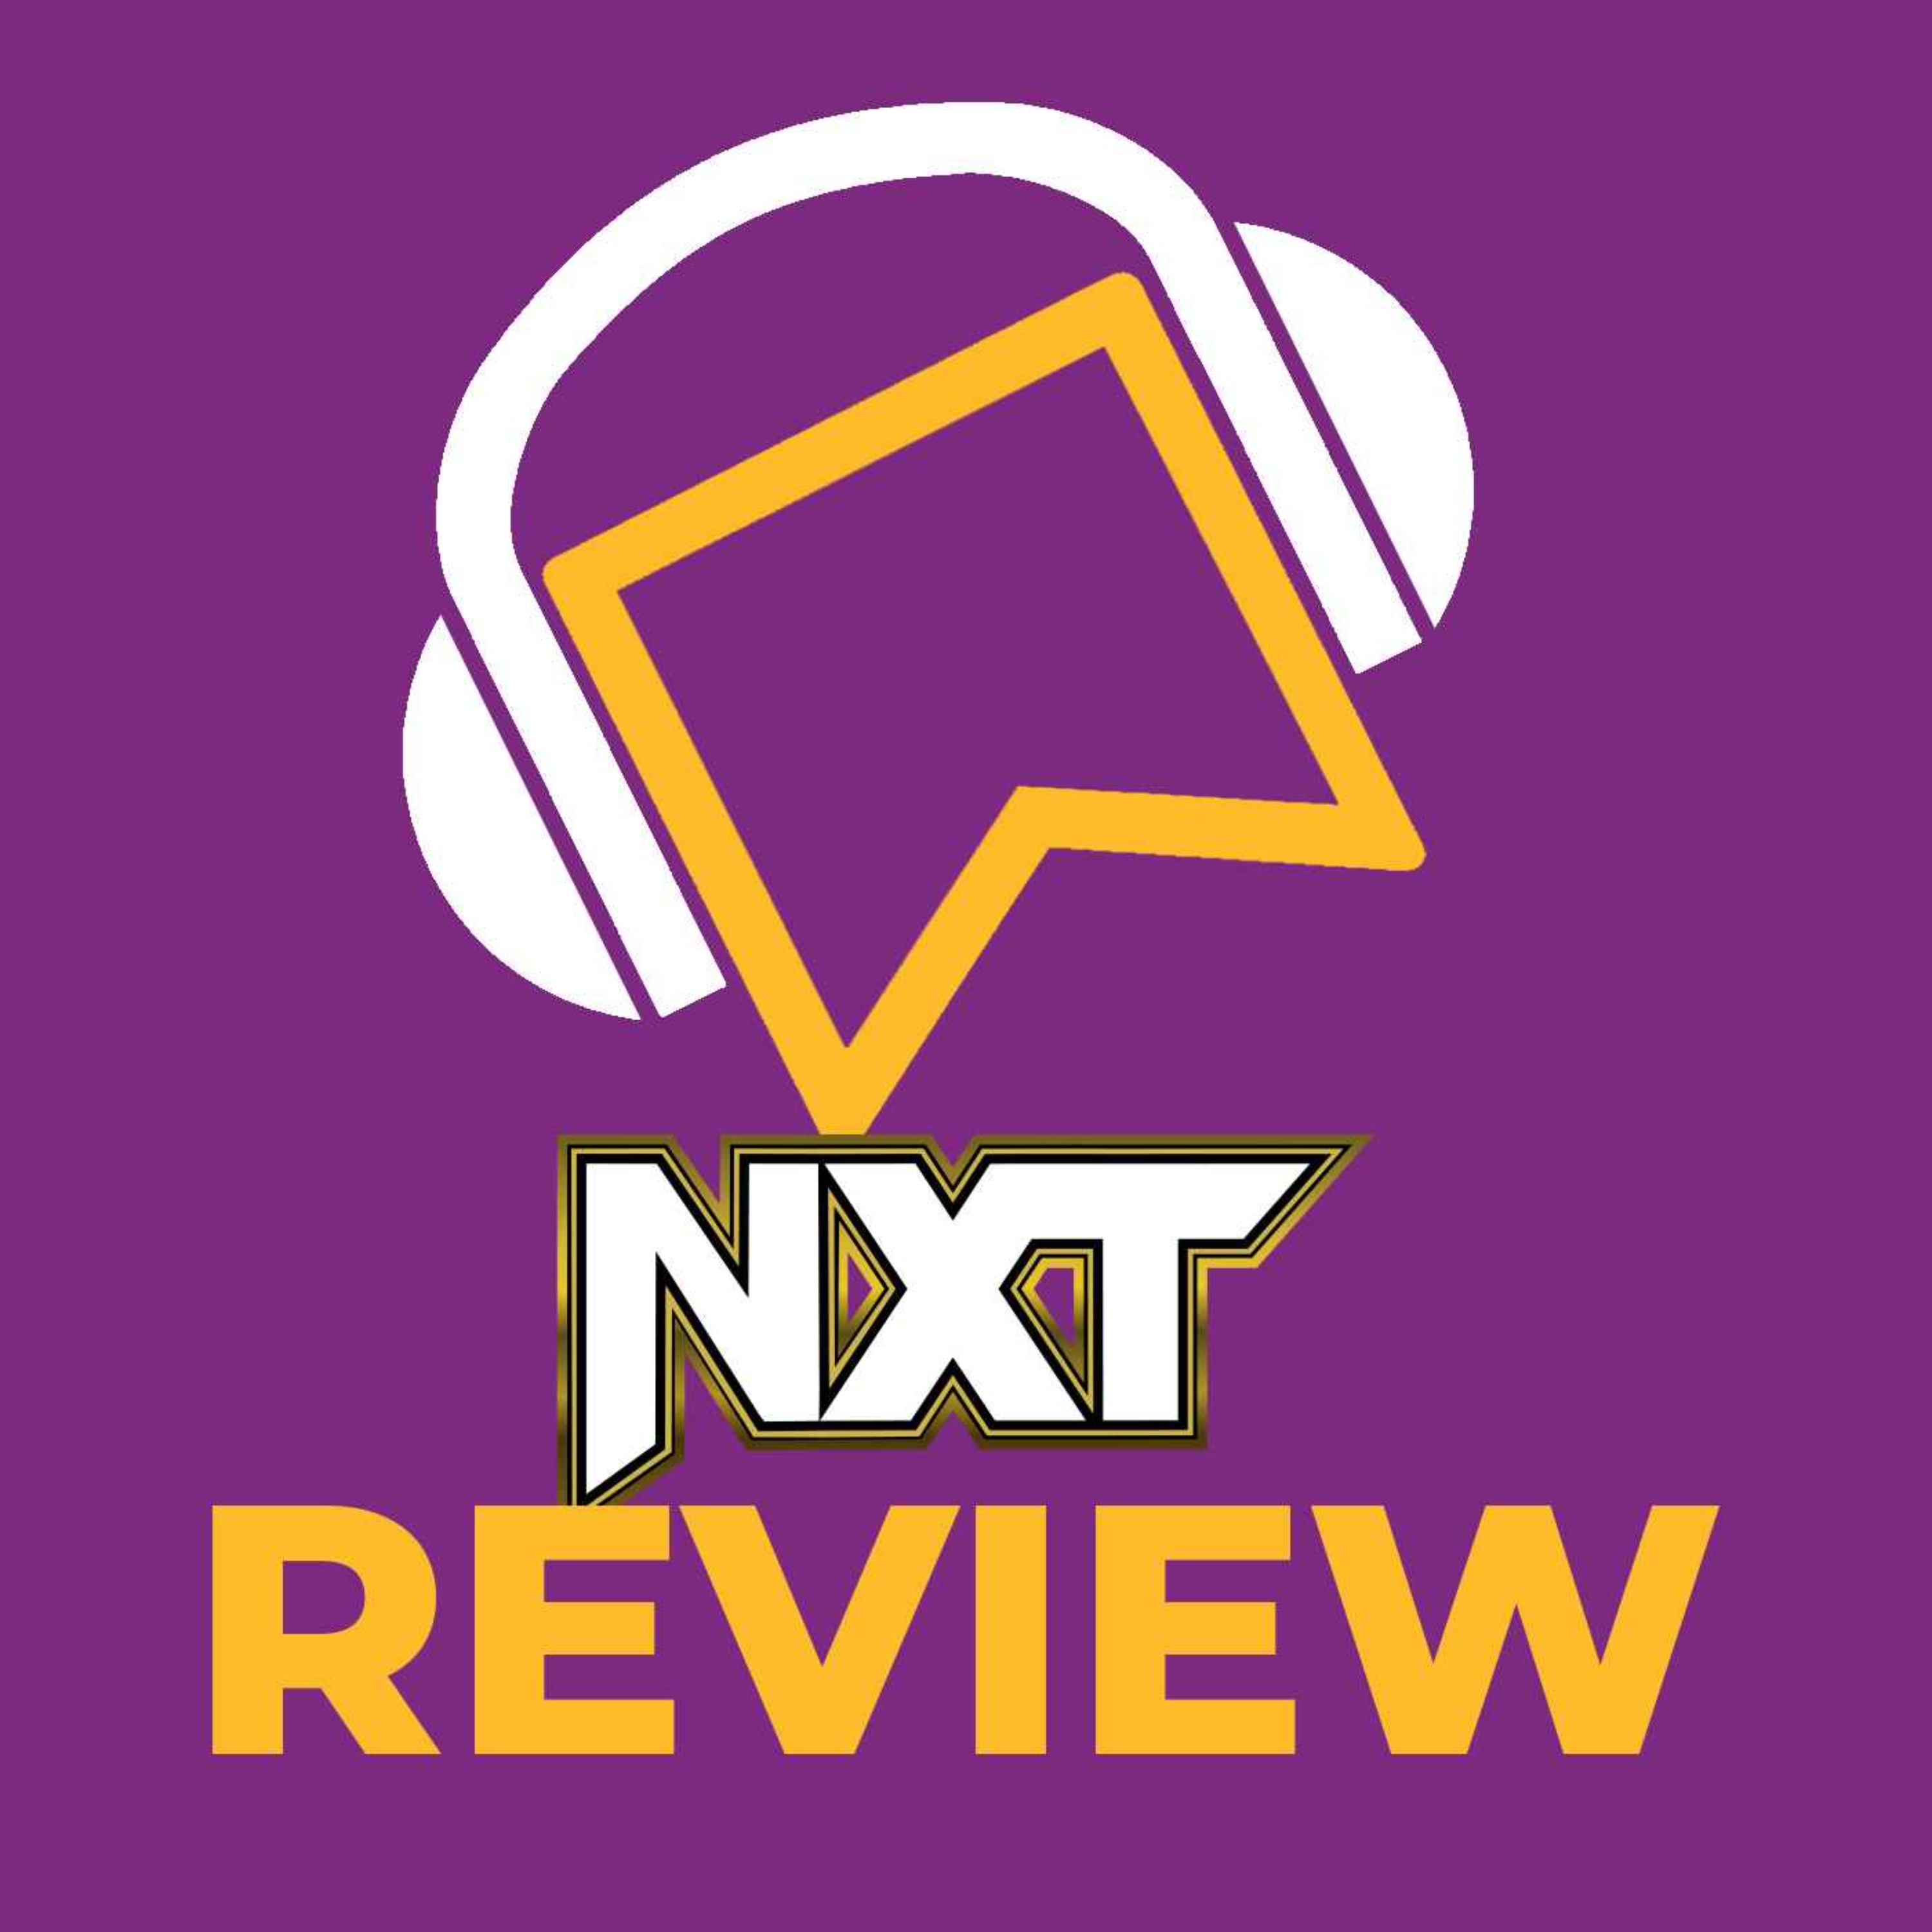 WWE NXT Review - Cody Rhodes Teases More TNA Crossovers! Roxy's State Of The Women’s Division Address! A BRUTAL Singapore Cane Match! Jacy Jayne Becomes...Dashing?!